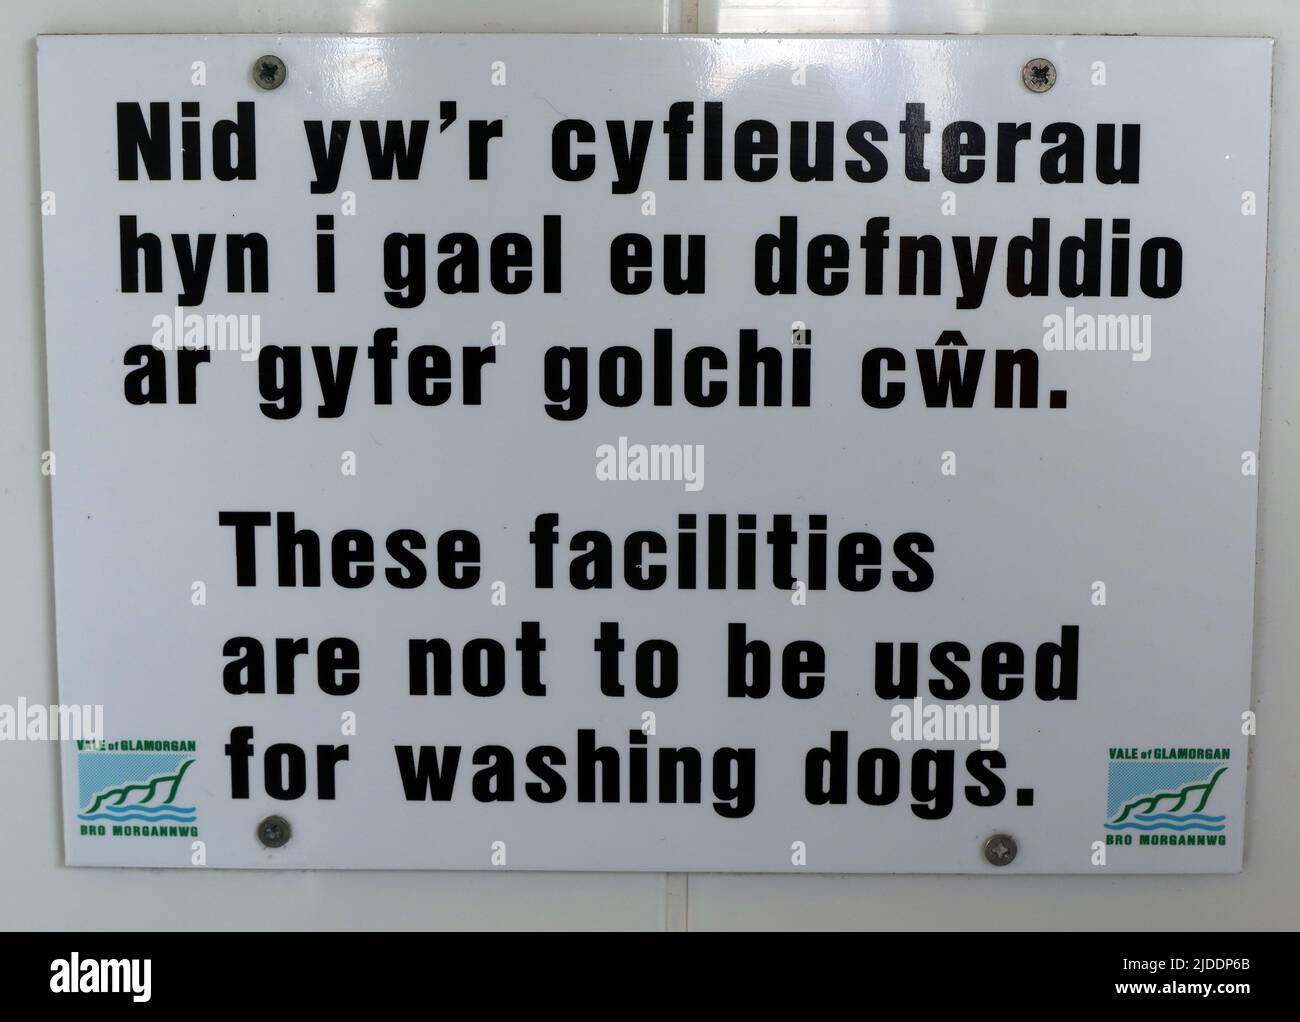 Sign - No washing of dogs in toilets, Public Conveniences, at Barry Island, Vale Of Glamorgan, Cymru, Wales, UK, CF62 5TJ Stock Photo